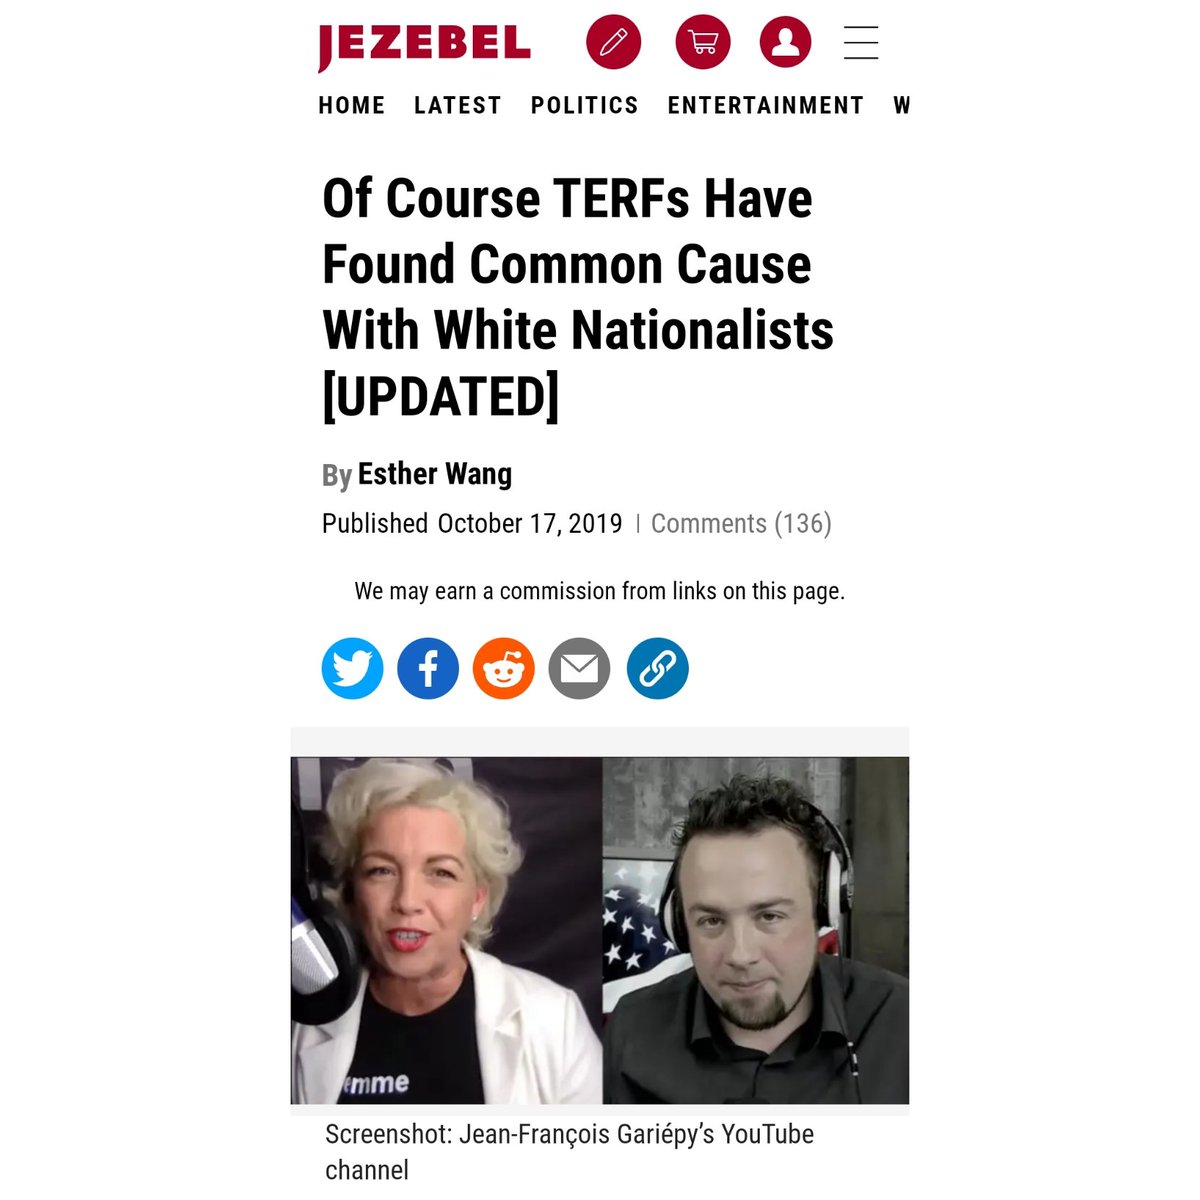 Of Course TERFs Have Found Common Cause With White Nationalists....

jezebel.com/of-course-terf…

#terfs #gendercritical #antitrans #whitenationalists #fascists